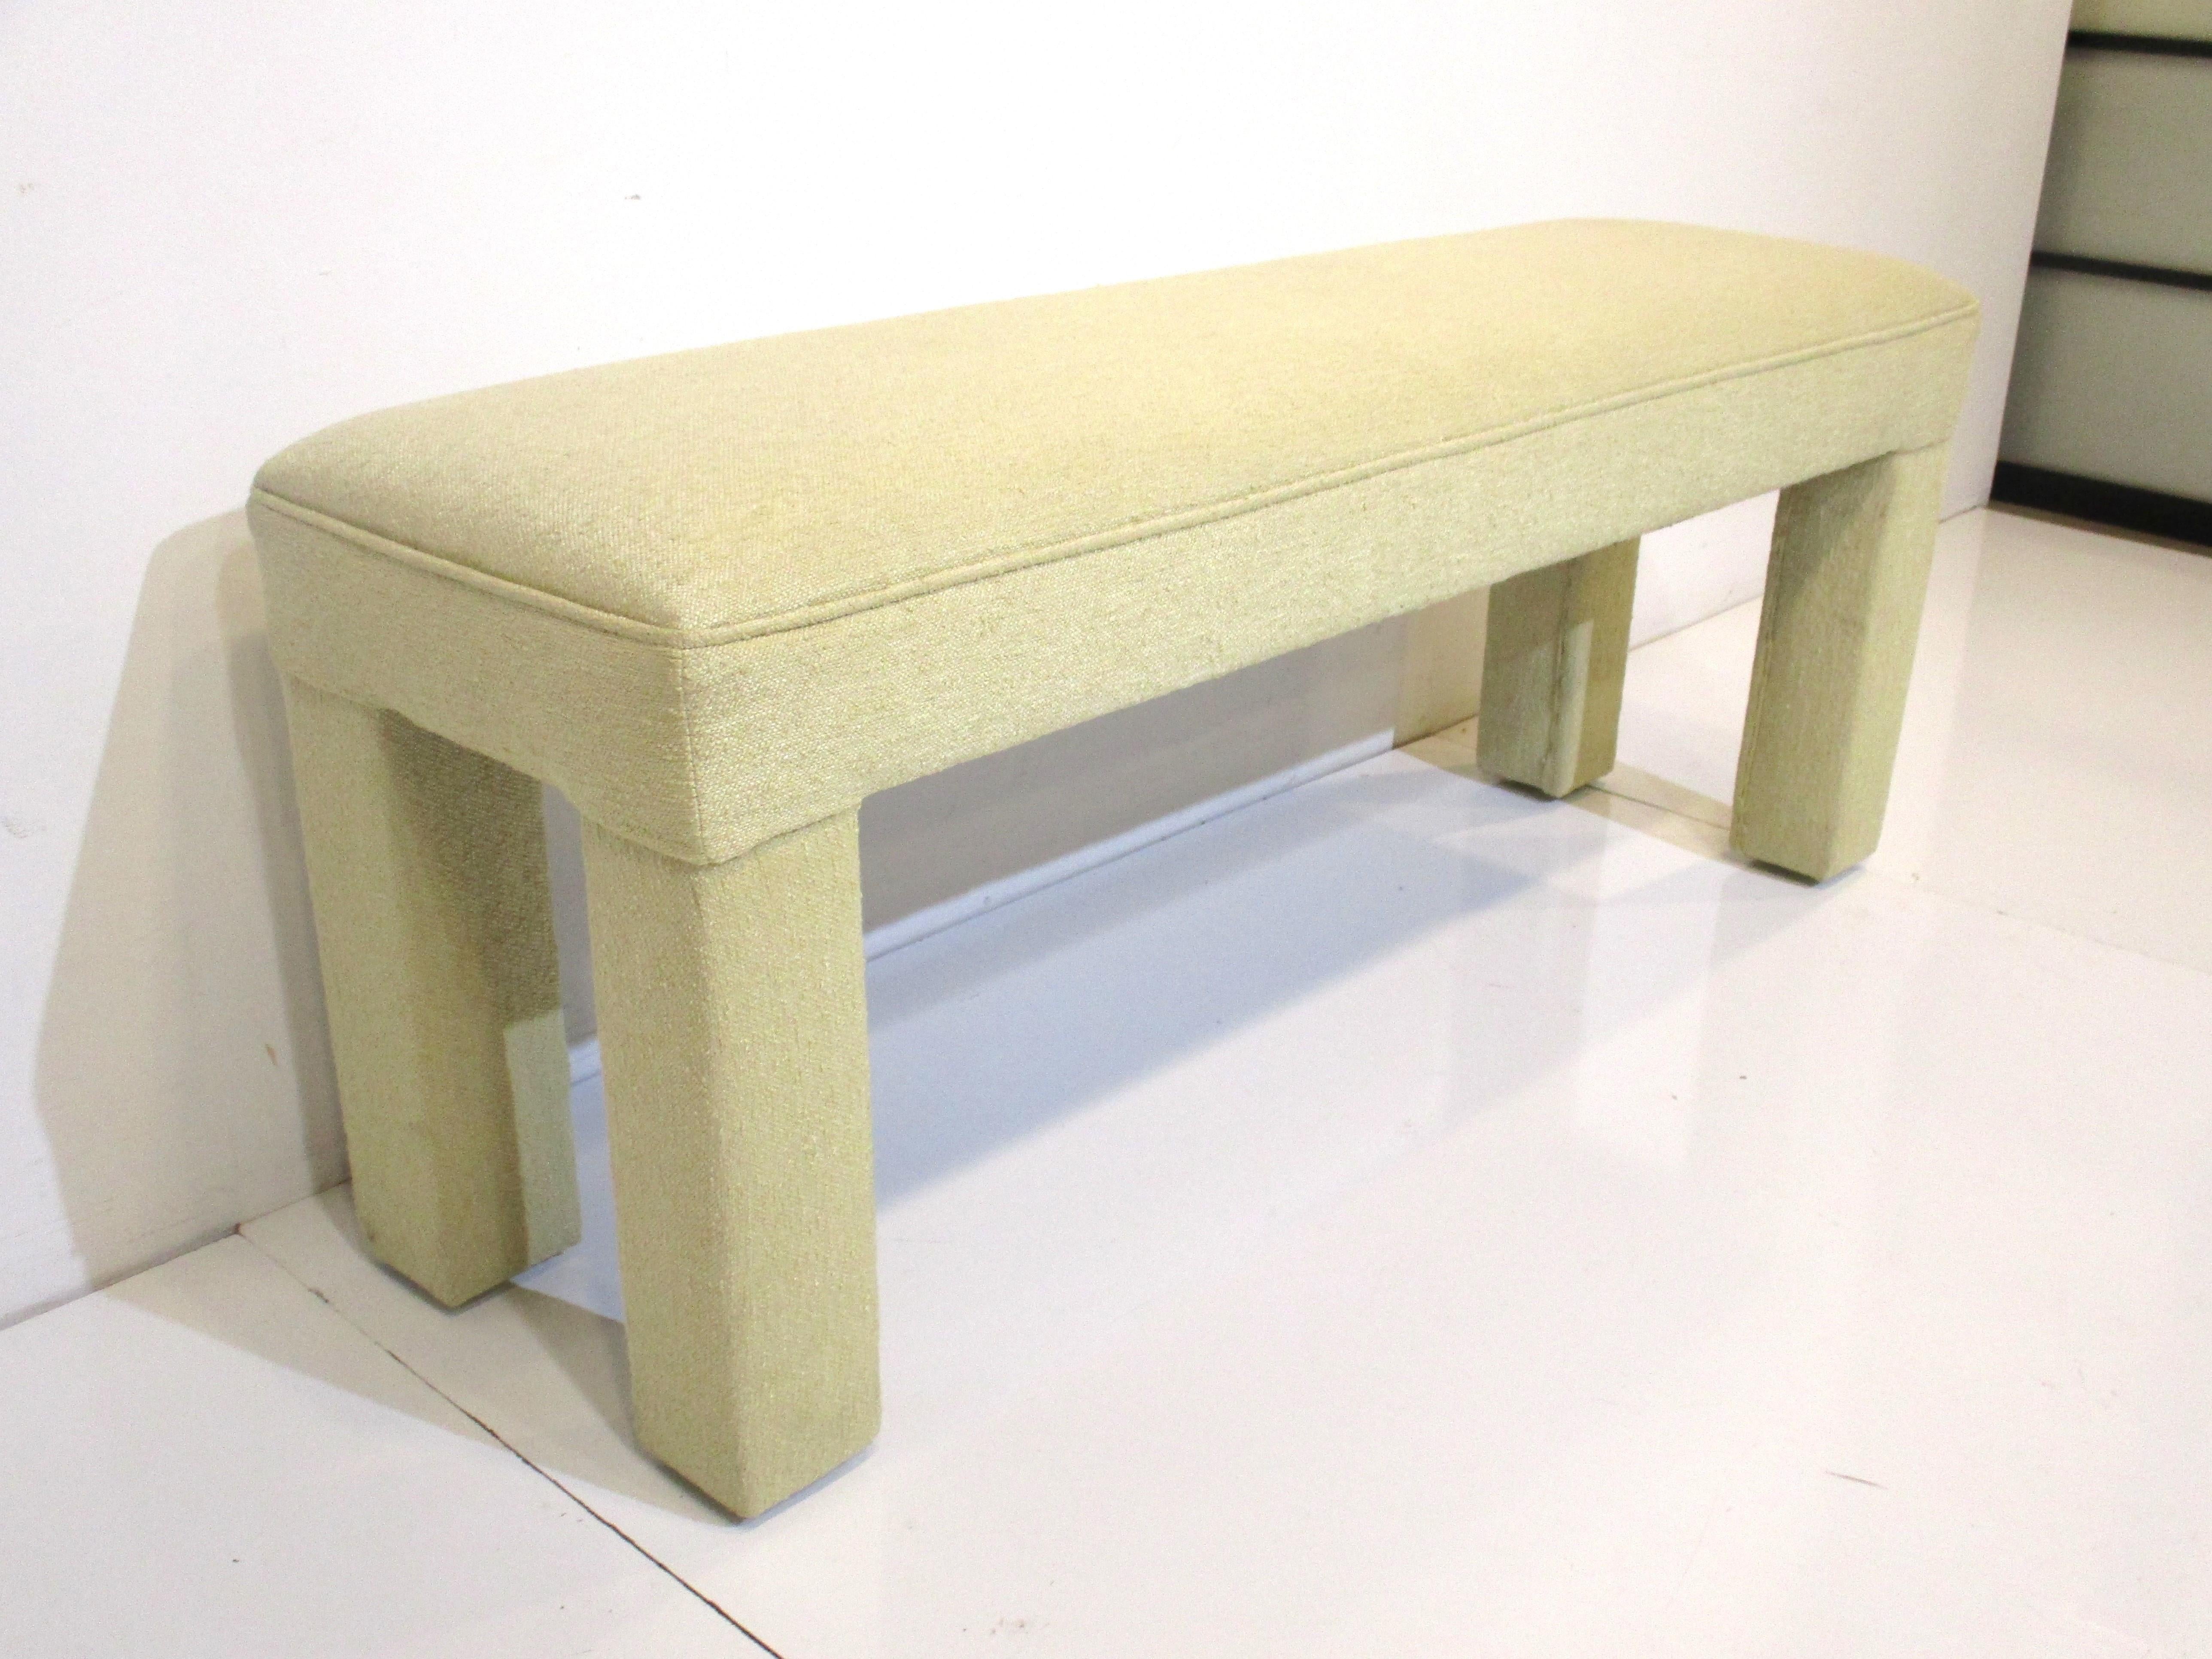 Upholstery Milo Baughman Styled Upholstered Bench For Sale